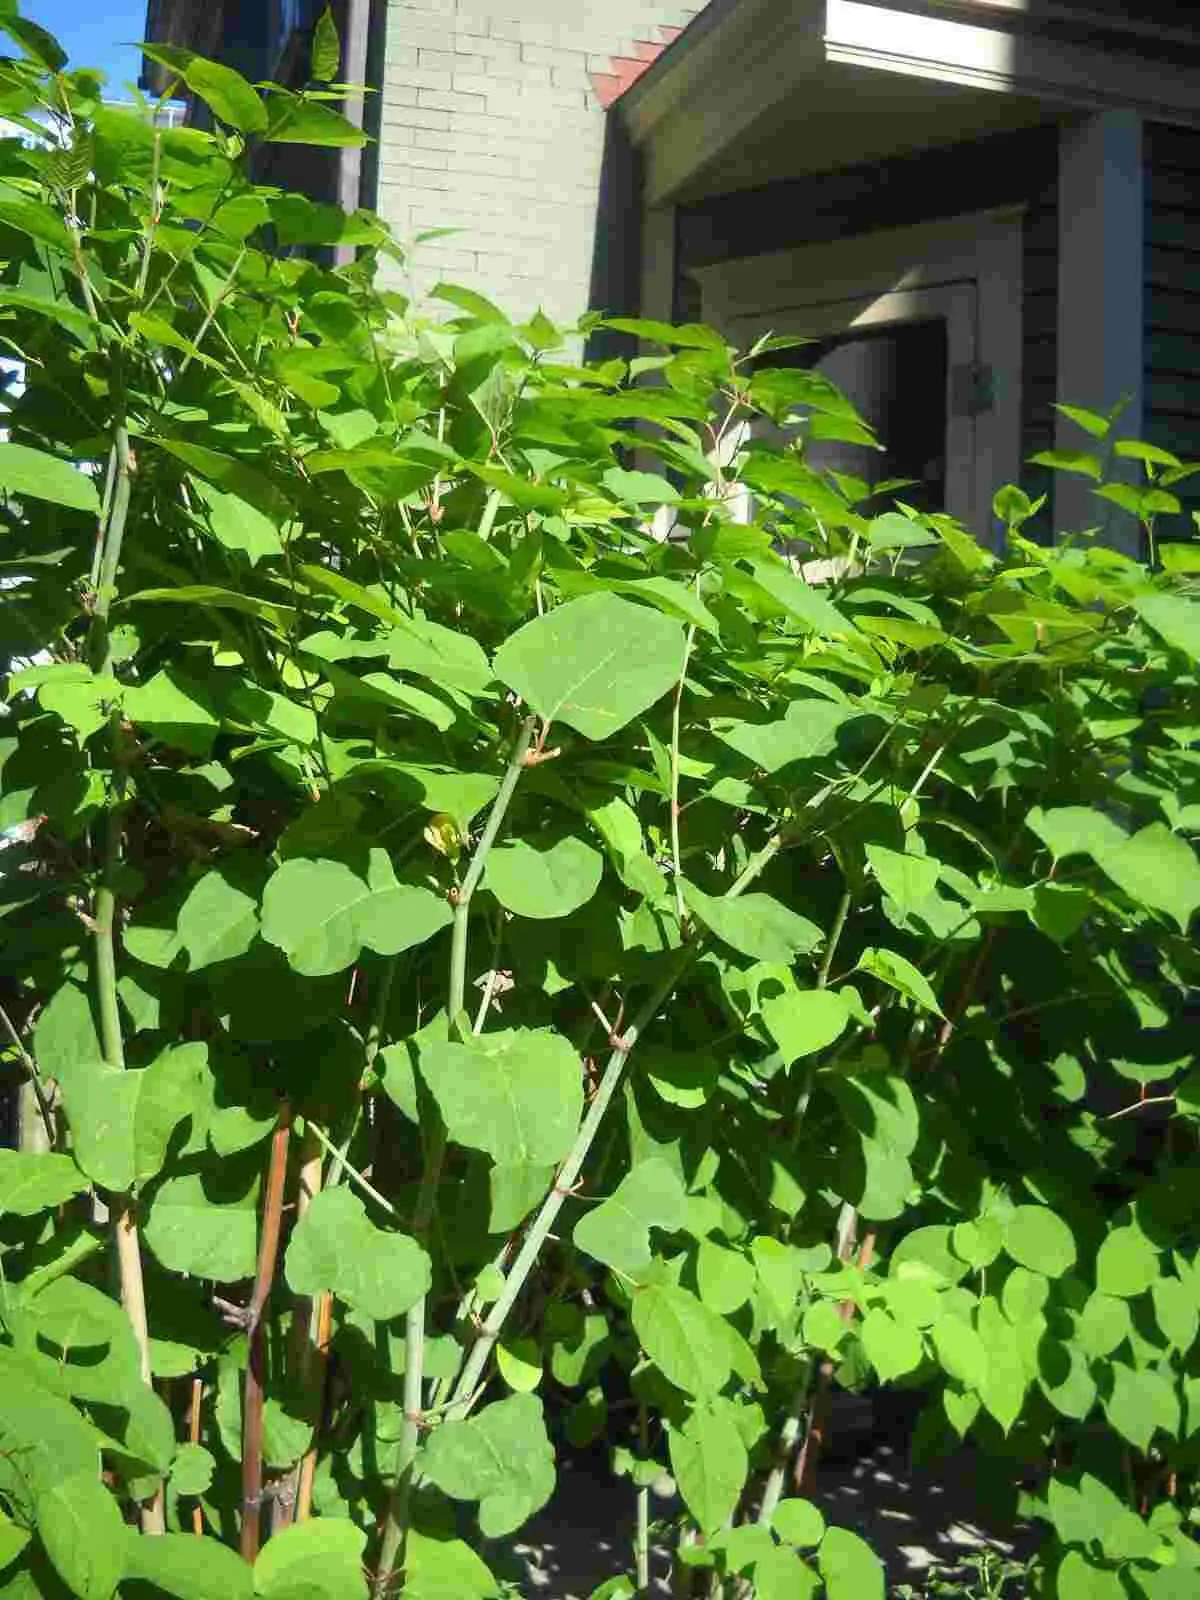 Japanese knotweed identification is essential to ascertain whether it poses a risk to your property or your neighbours land